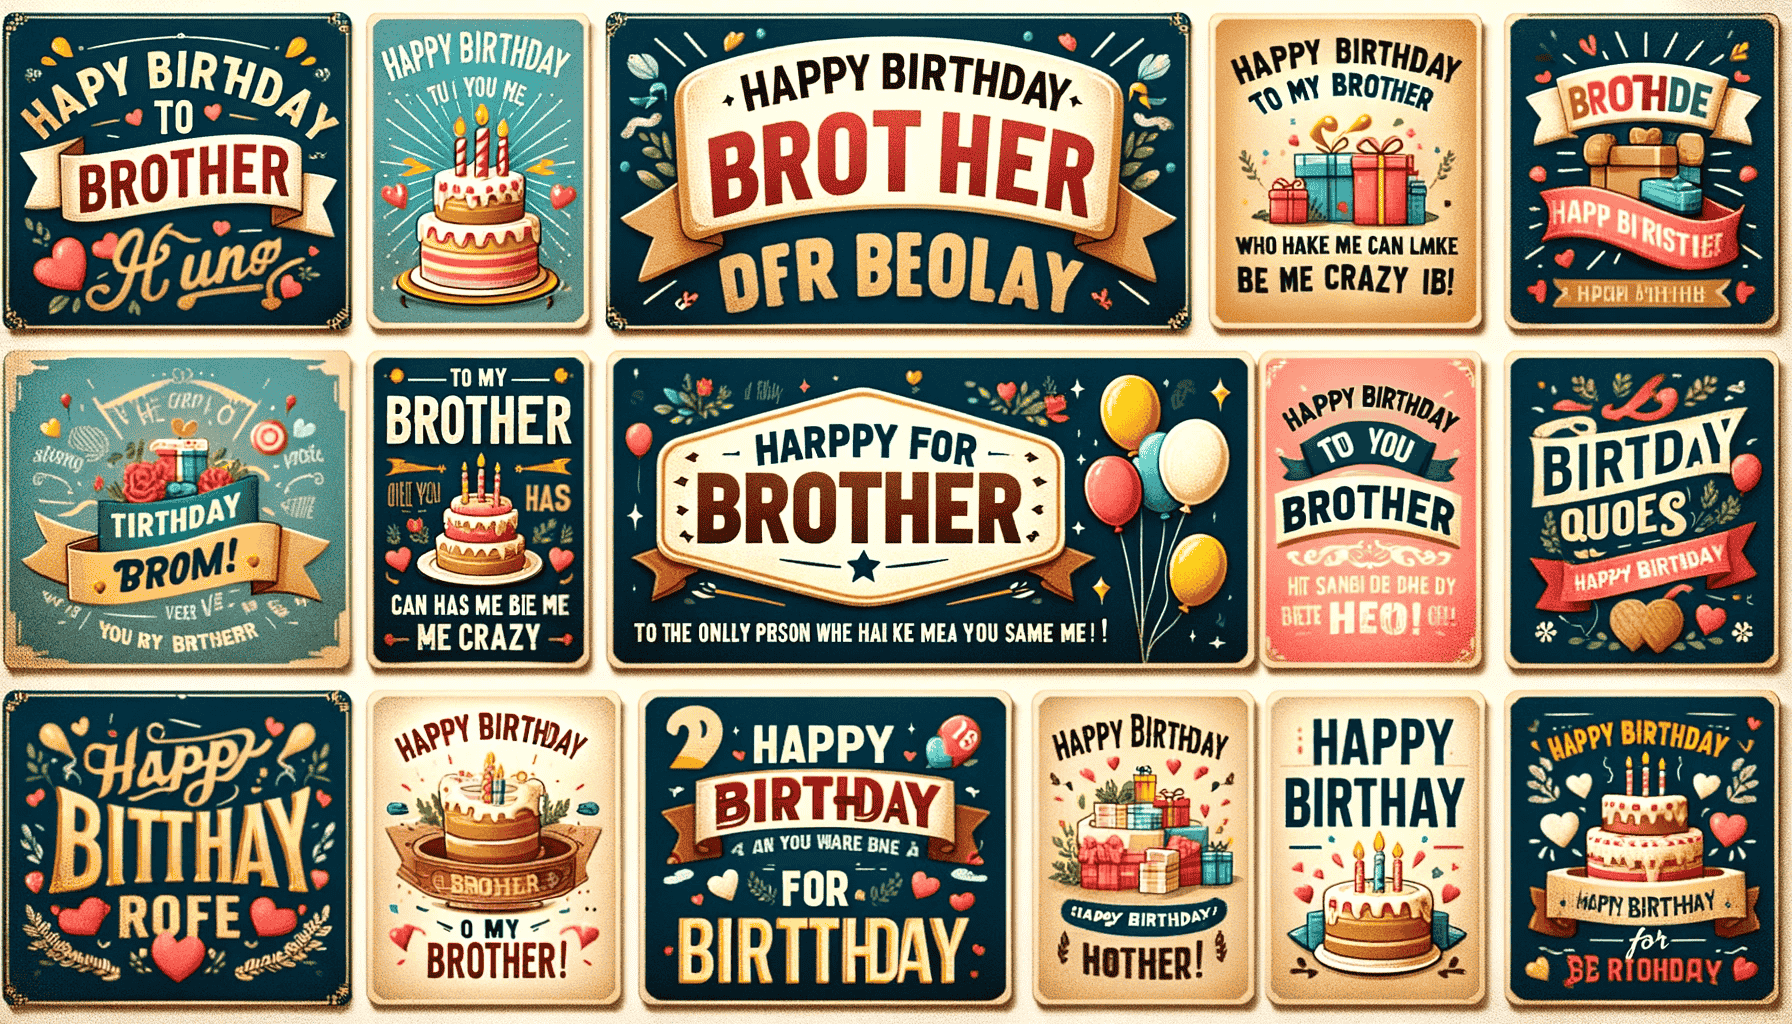 birthdya quotes for brother